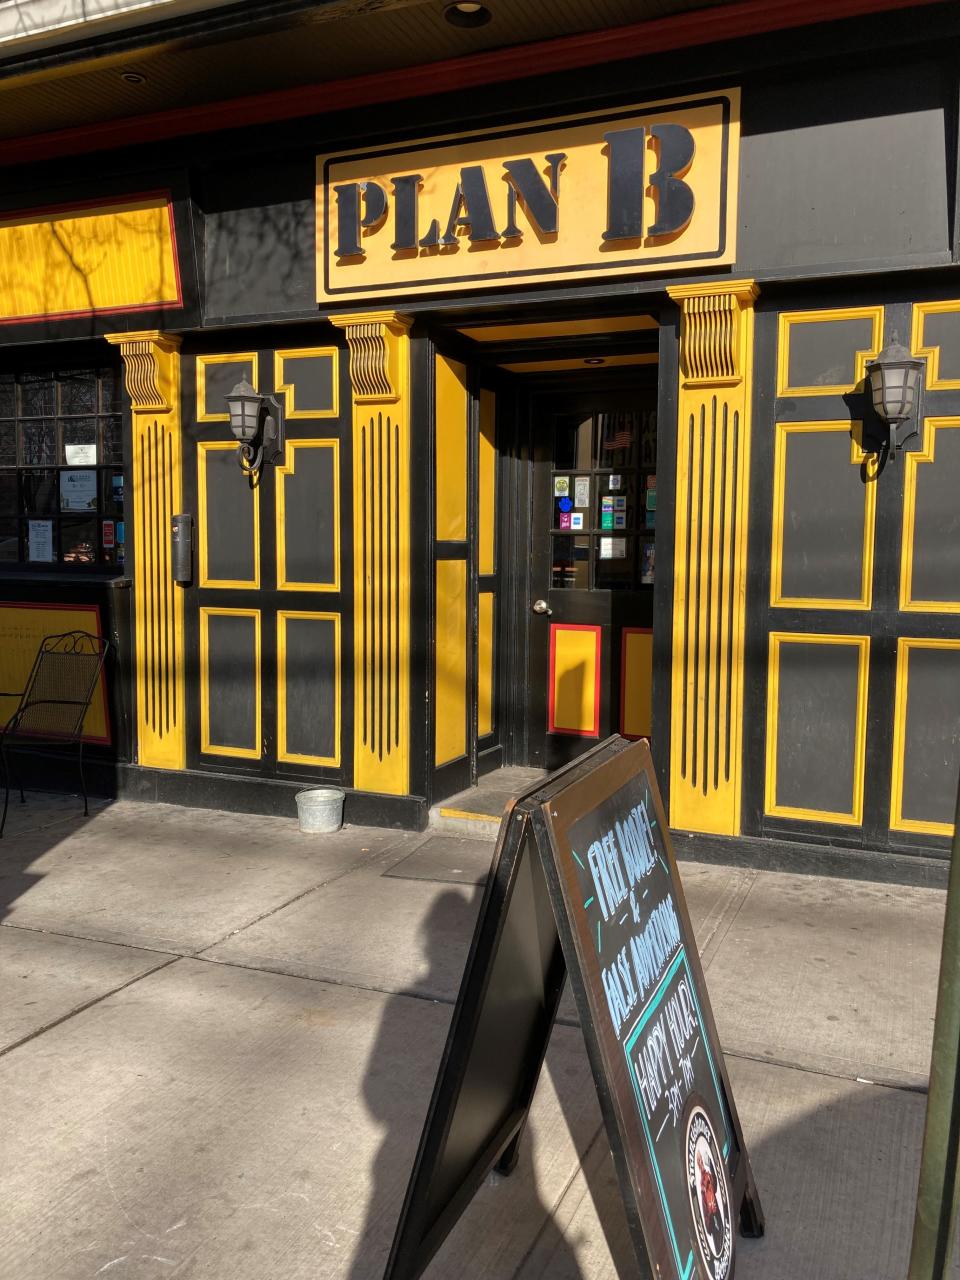 Plan B in Suffern is participating in Suffern's Restaurant Week,  Aug. 21 to 25.